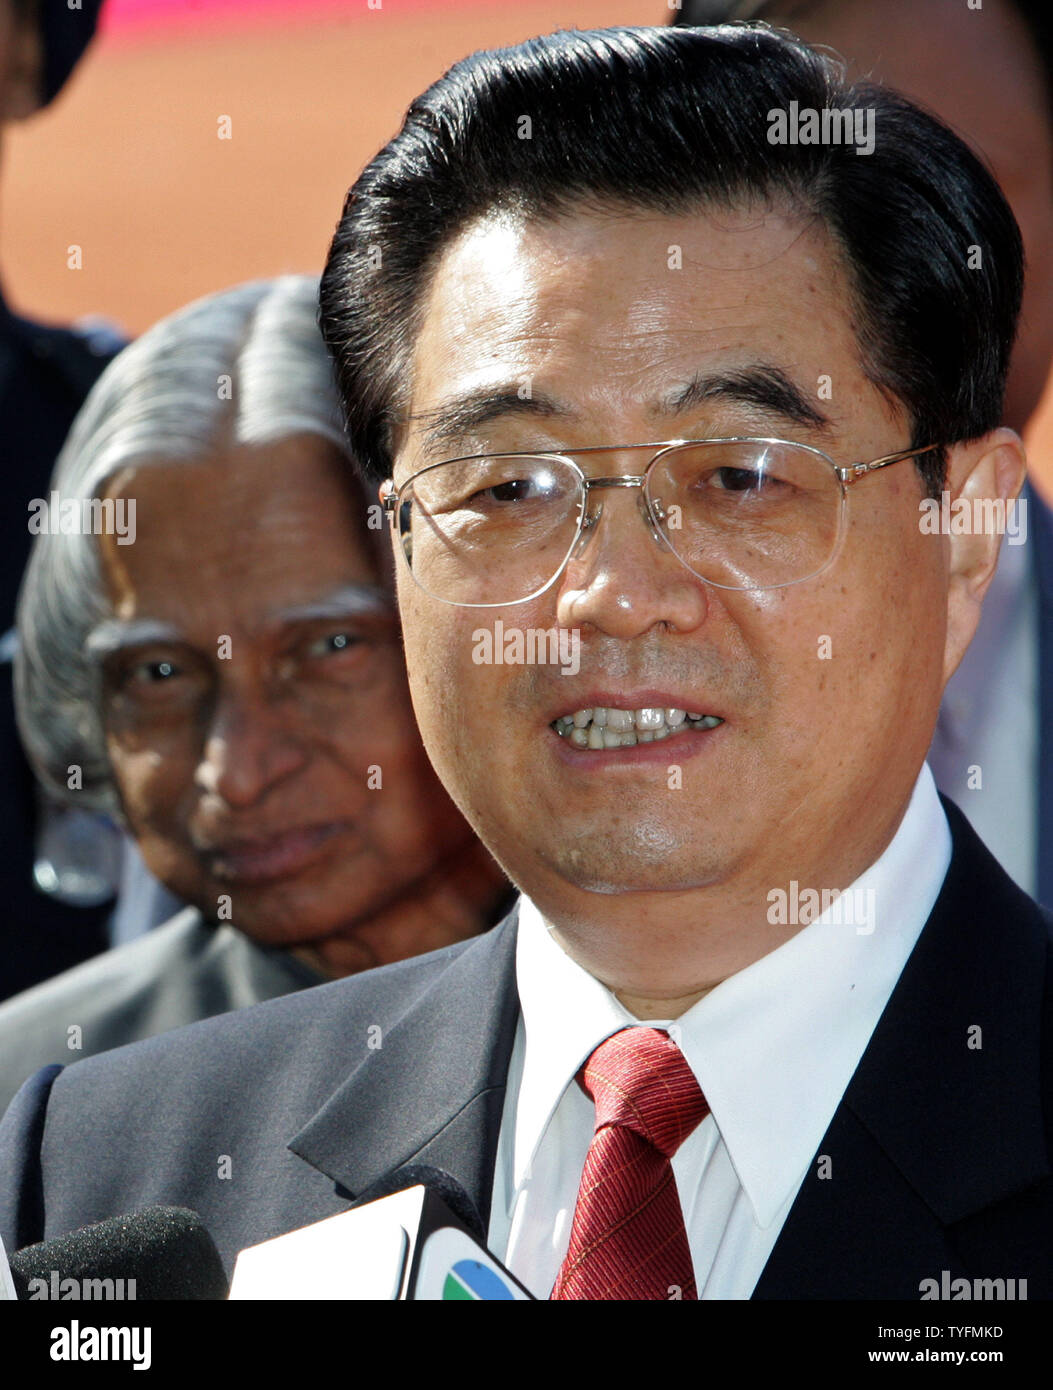 Chinese President Hu Jintao (R) addresses the media as his Indian counterpart Abdul Kalam (L) looks on during a welcoming ceremony in New Delhi, November 21, 2006. Hu Jintao is in India on a four-day official visit.   (UPI Photo/Kamal Kishore) Stock Photo